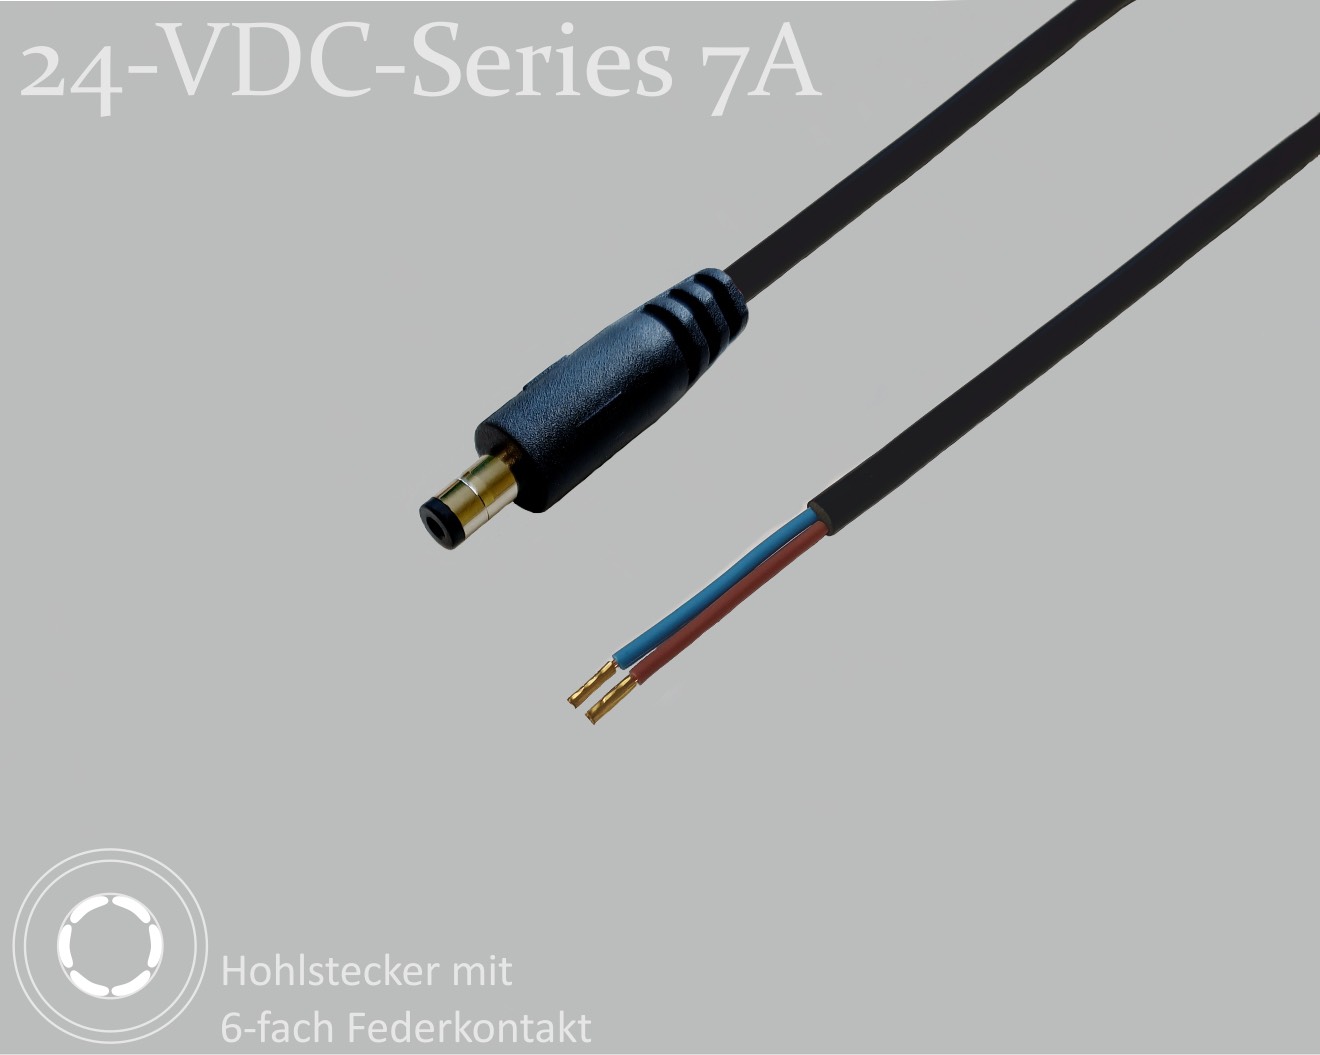 24-VDC-Series 7A, DC connection cable, DC plug with 6-spring contact 2.5x5.5x9.5mm, round cable 2x0.50mm², black, wire end sleeves, 1.5m